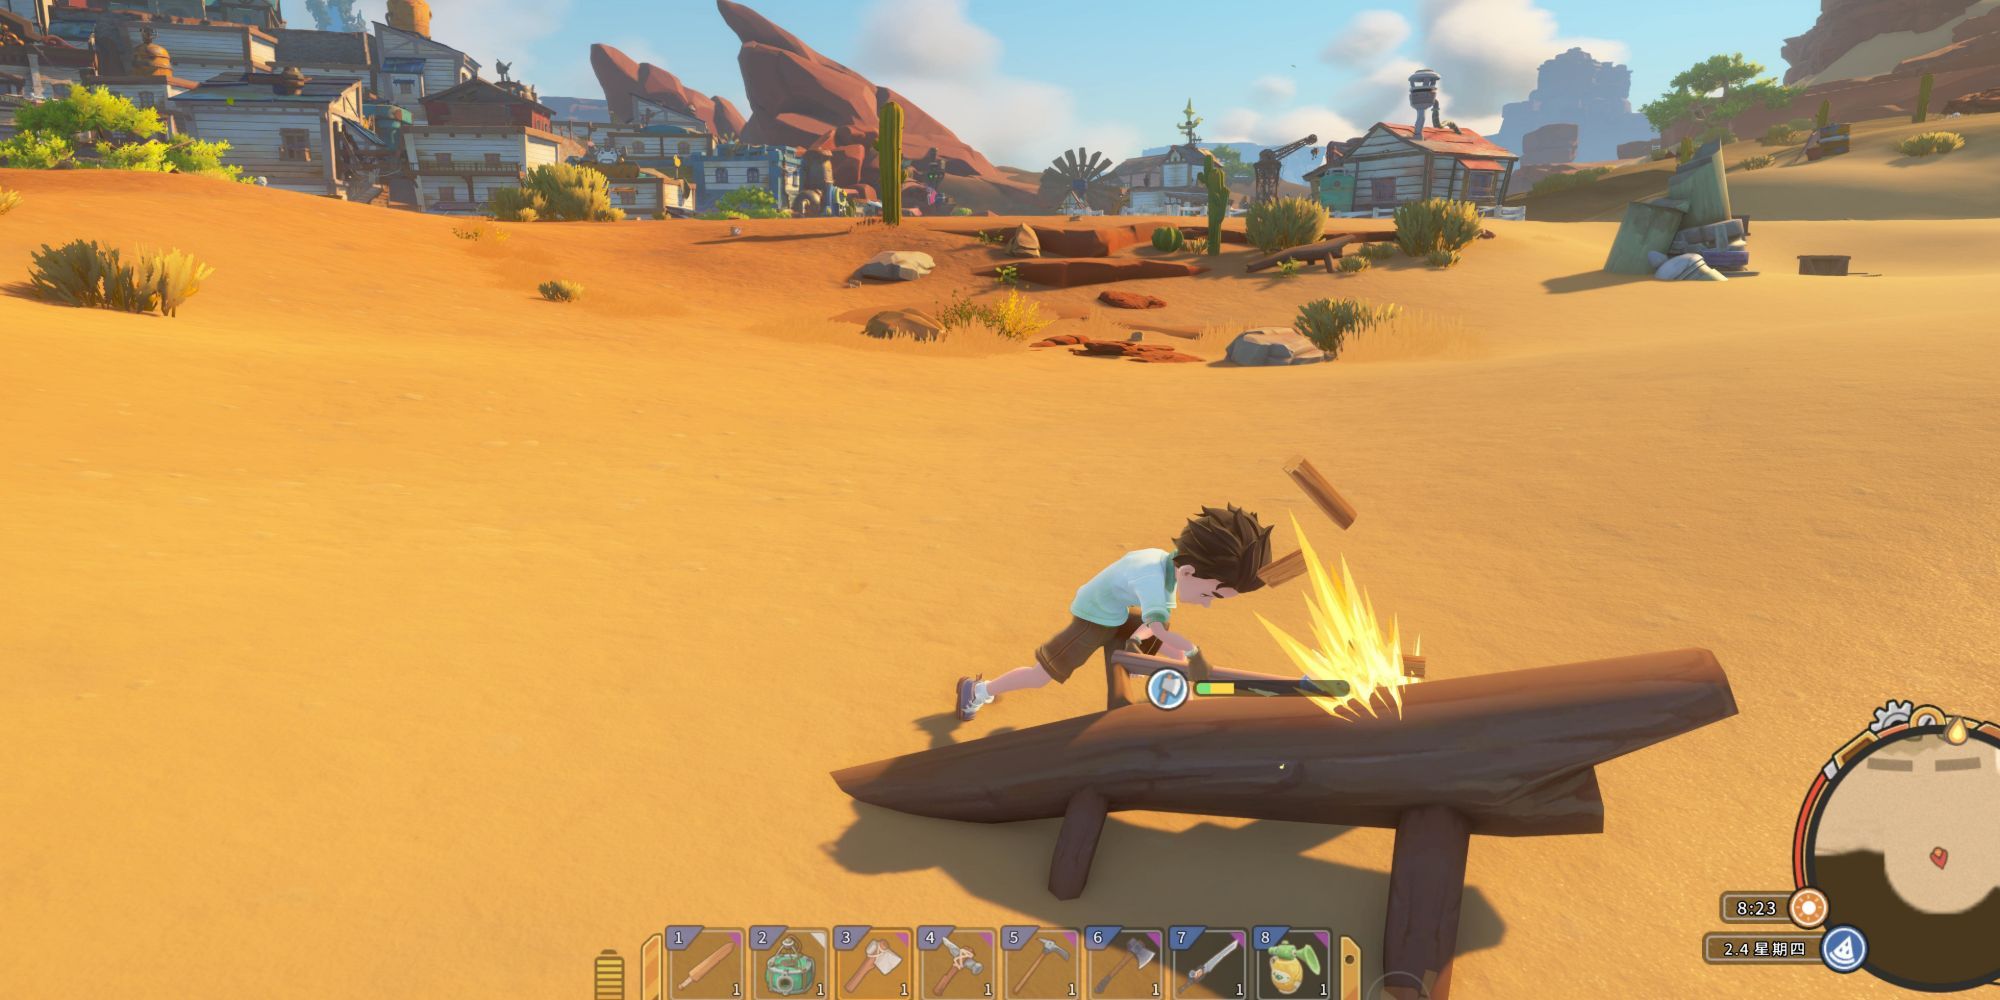 A farmer in My time at Sandrock hacks a log with an ax in the desert